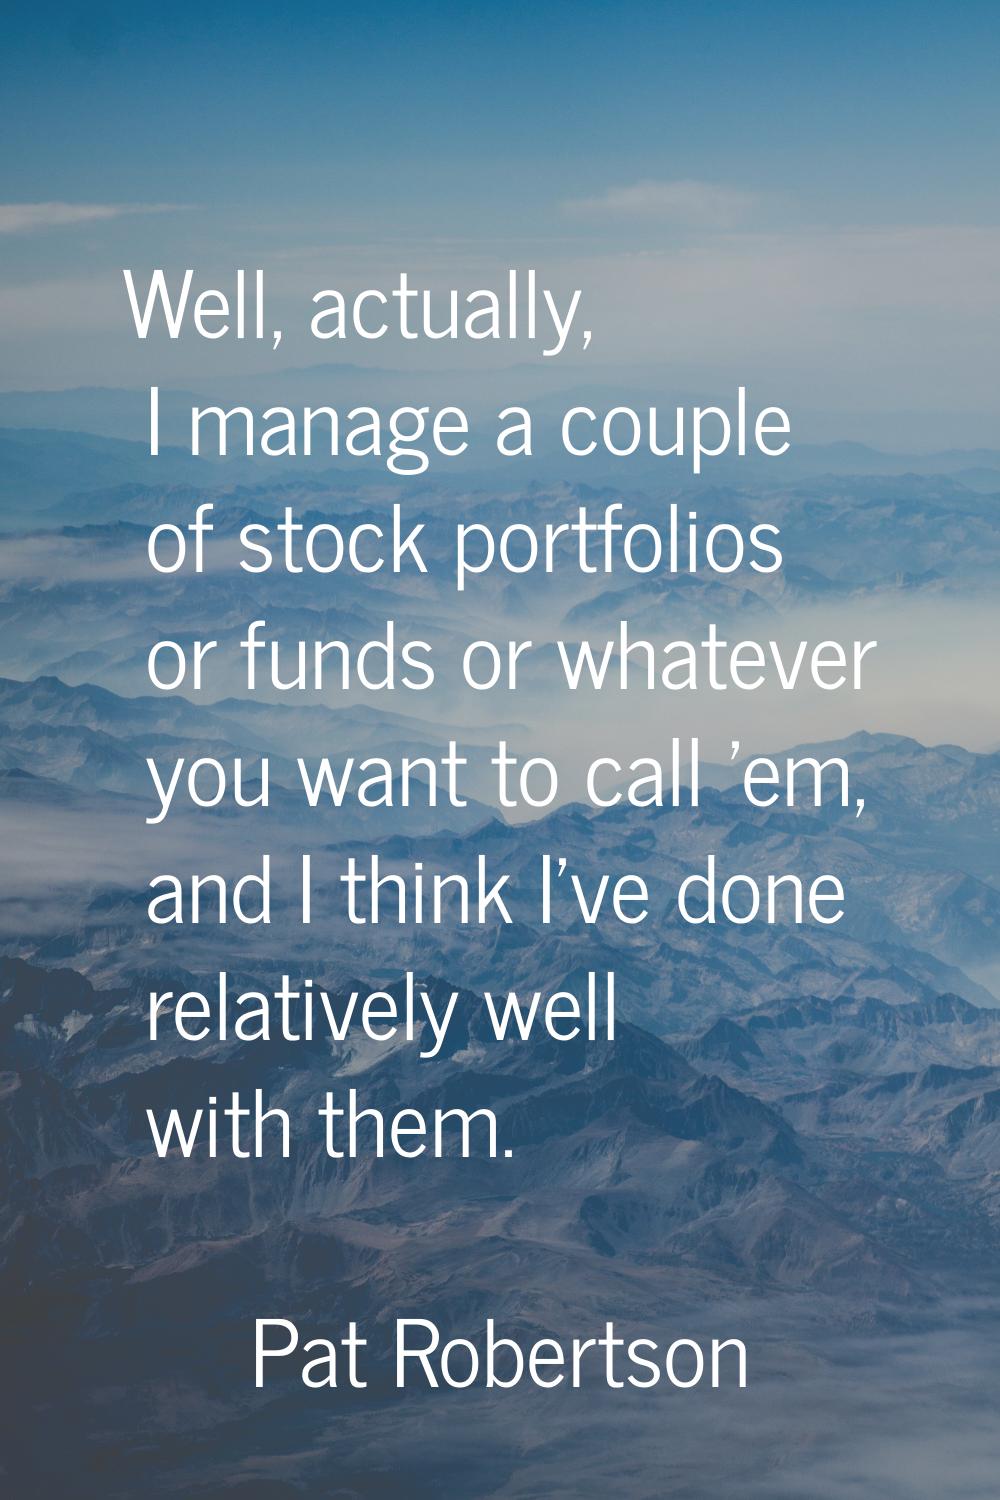 Well, actually, I manage a couple of stock portfolios or funds or whatever you want to call 'em, an